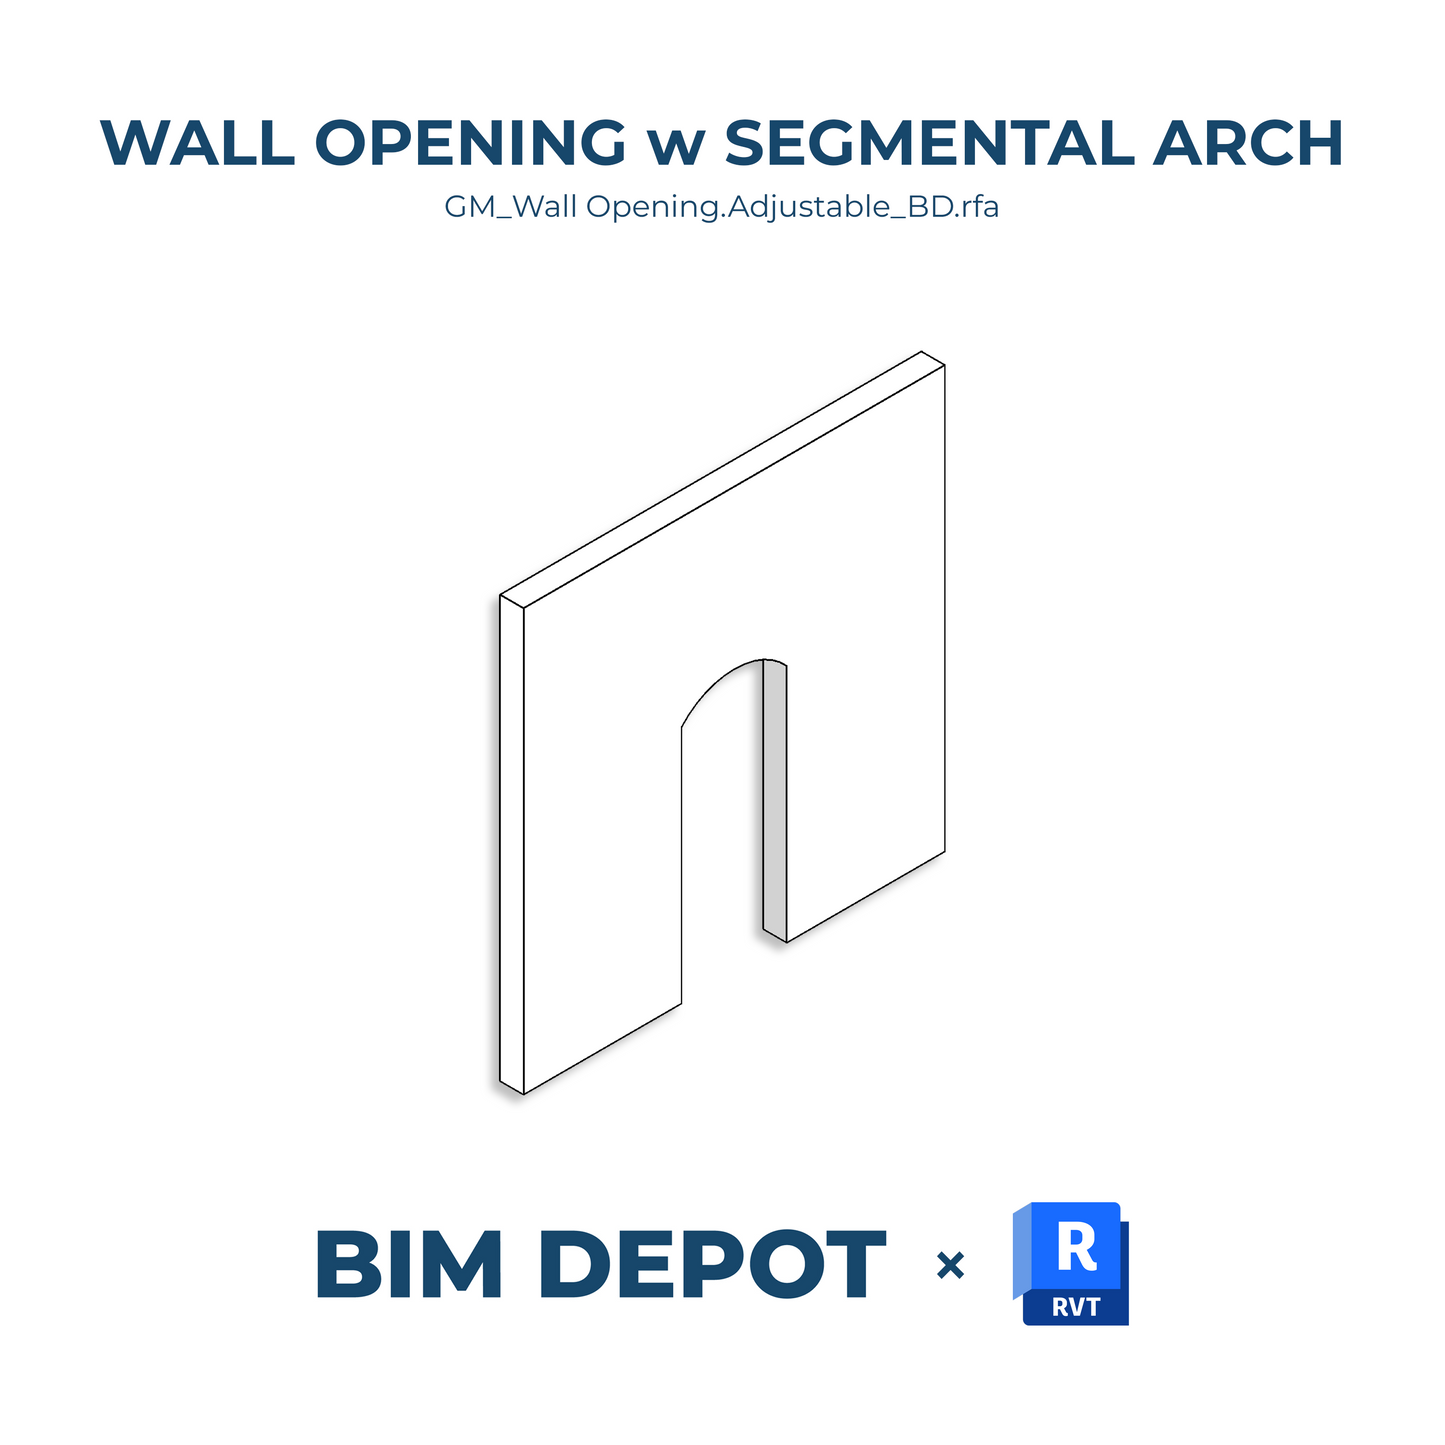 Wall Opening with Segmental Arch